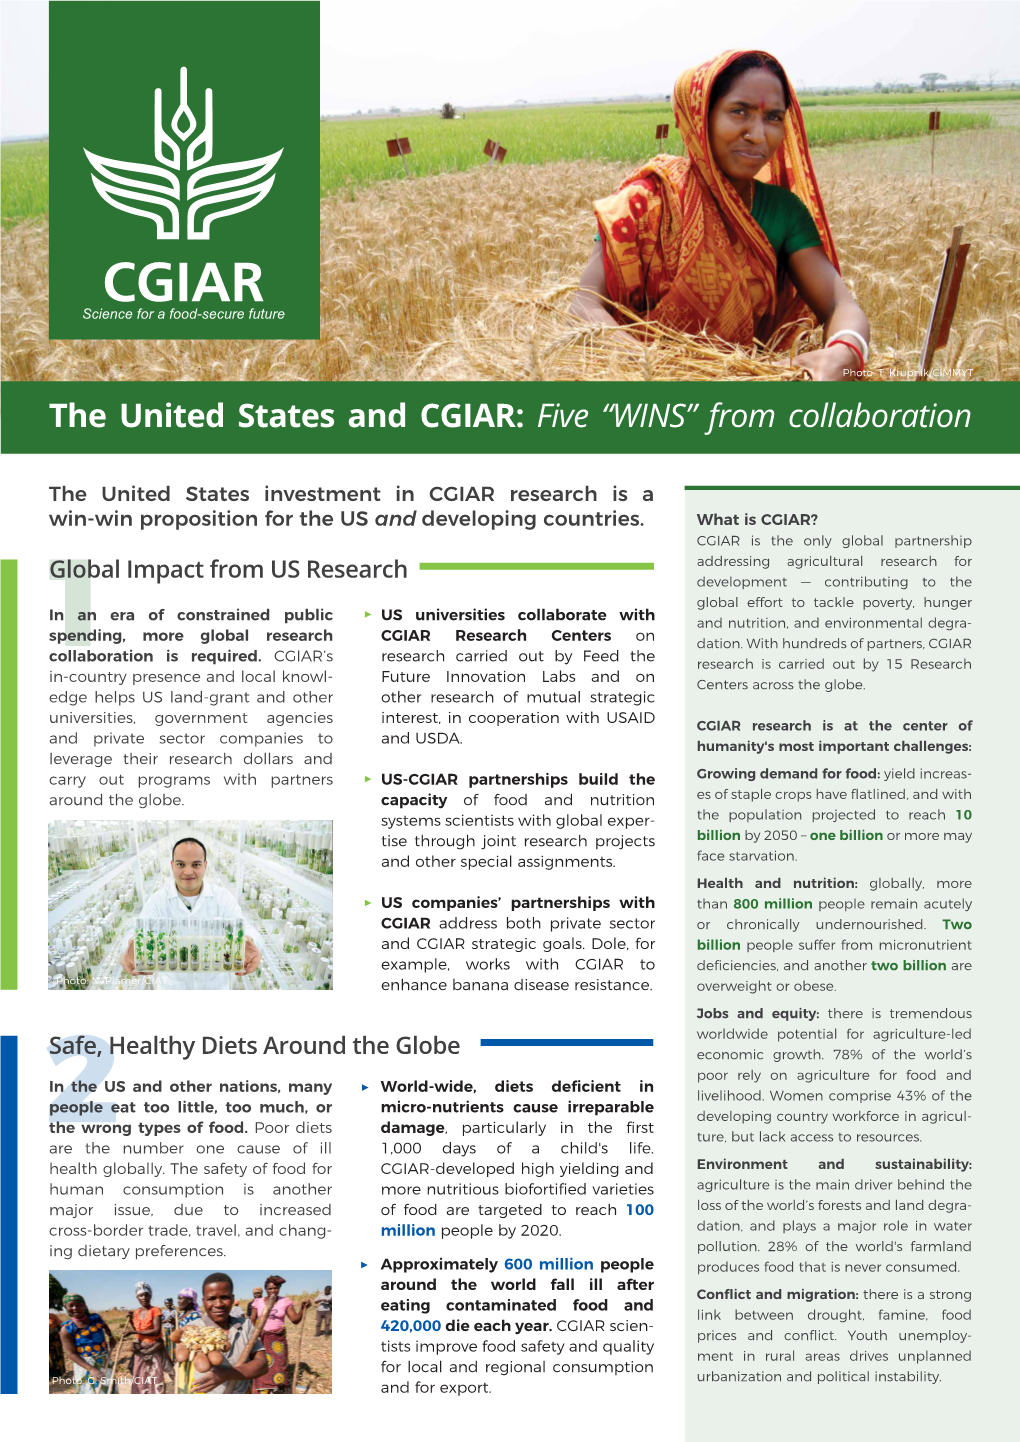 The United States and CGIAR: Five “WINS” from Collaboration